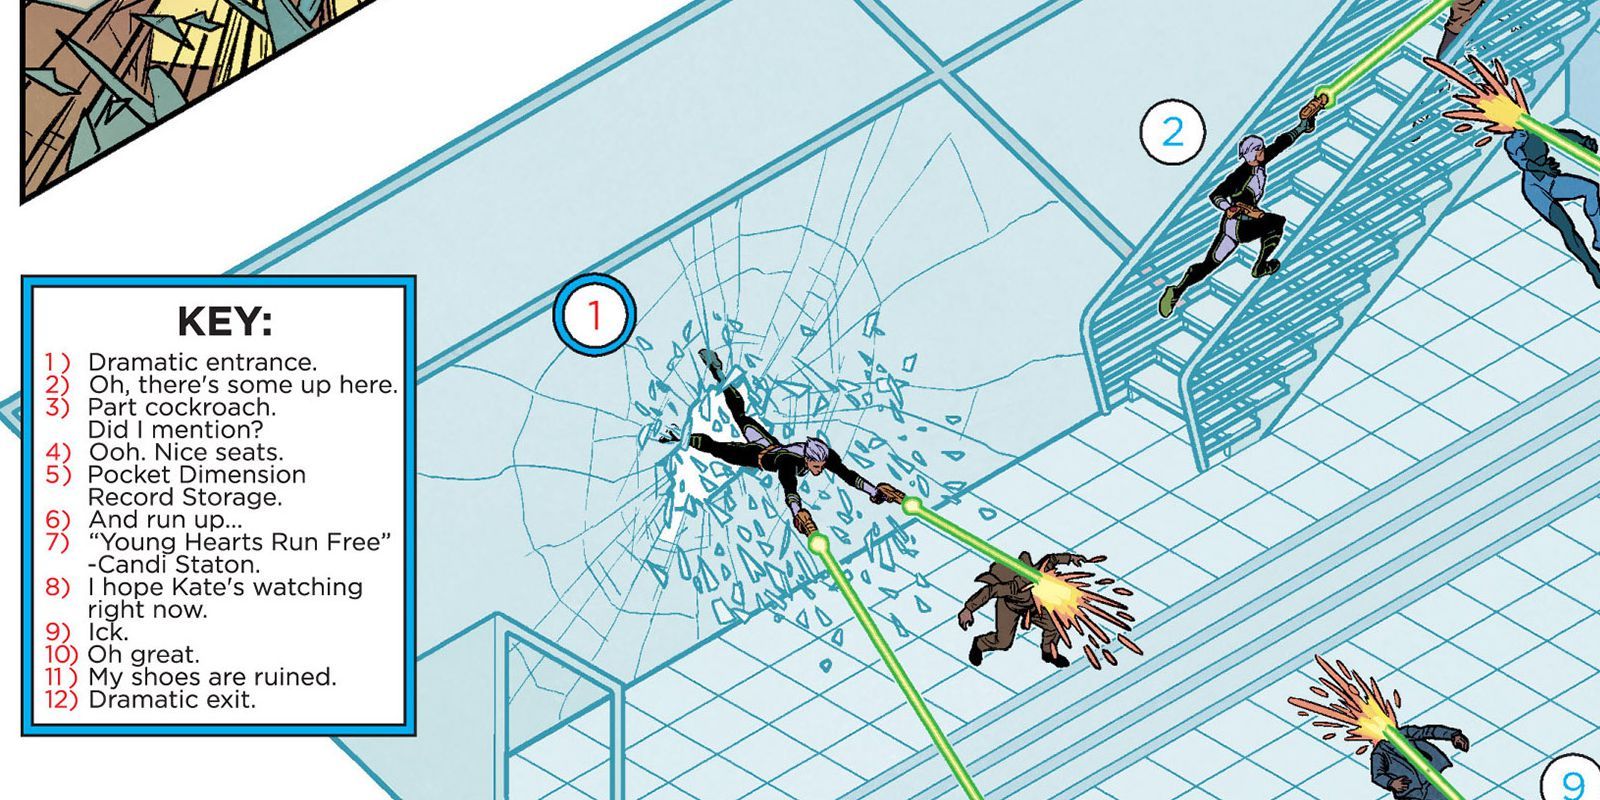 Young Avengers 15 Reasons The Gillen and McKelvie Run Was Great